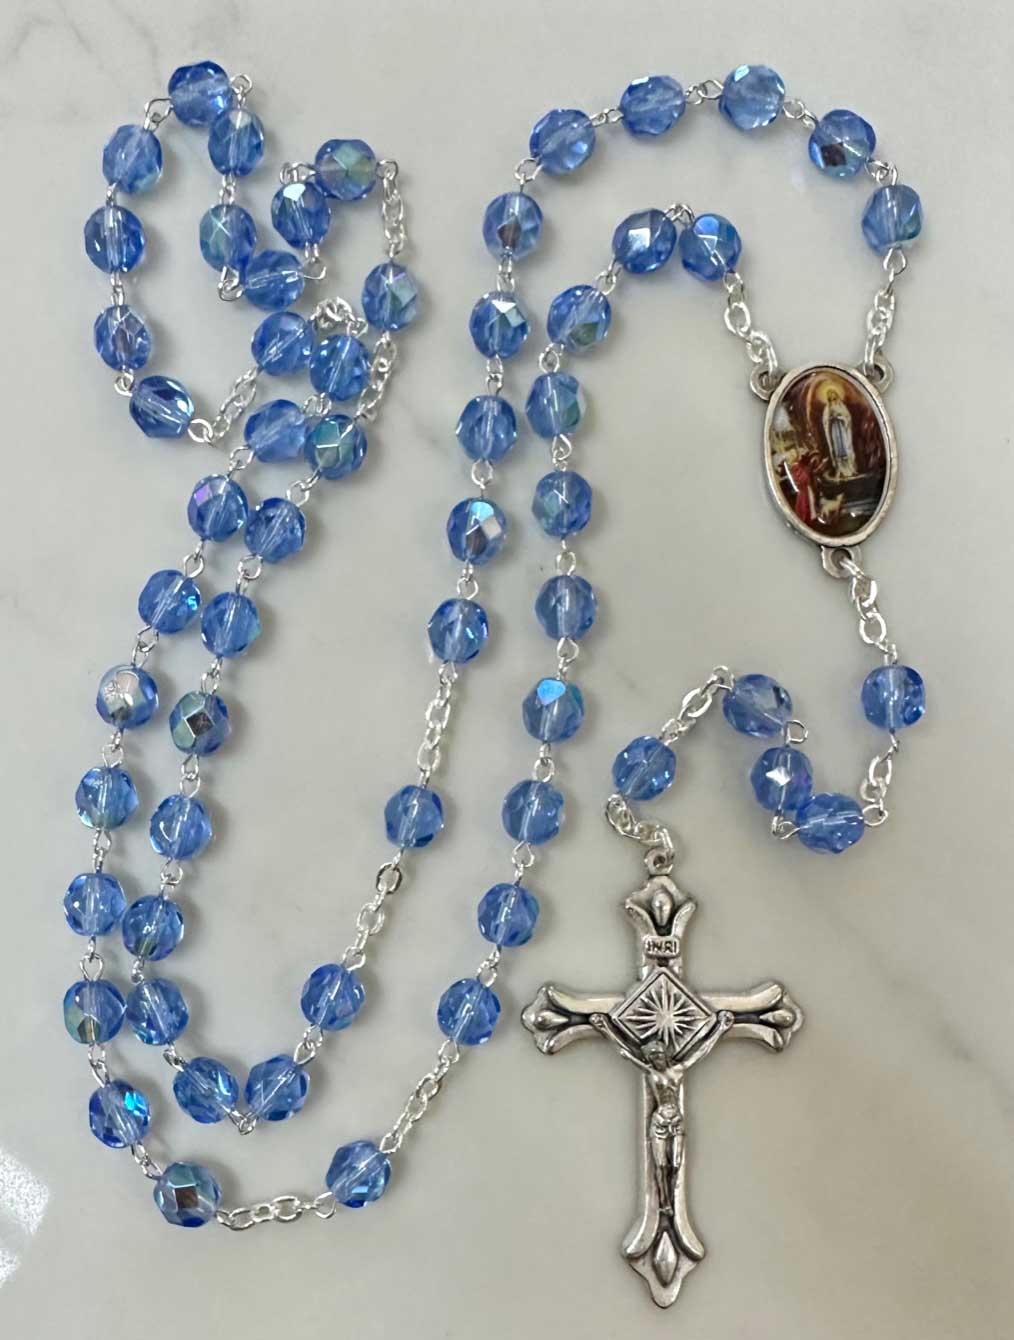 Our Lady of Lourdes Rosary & Medal